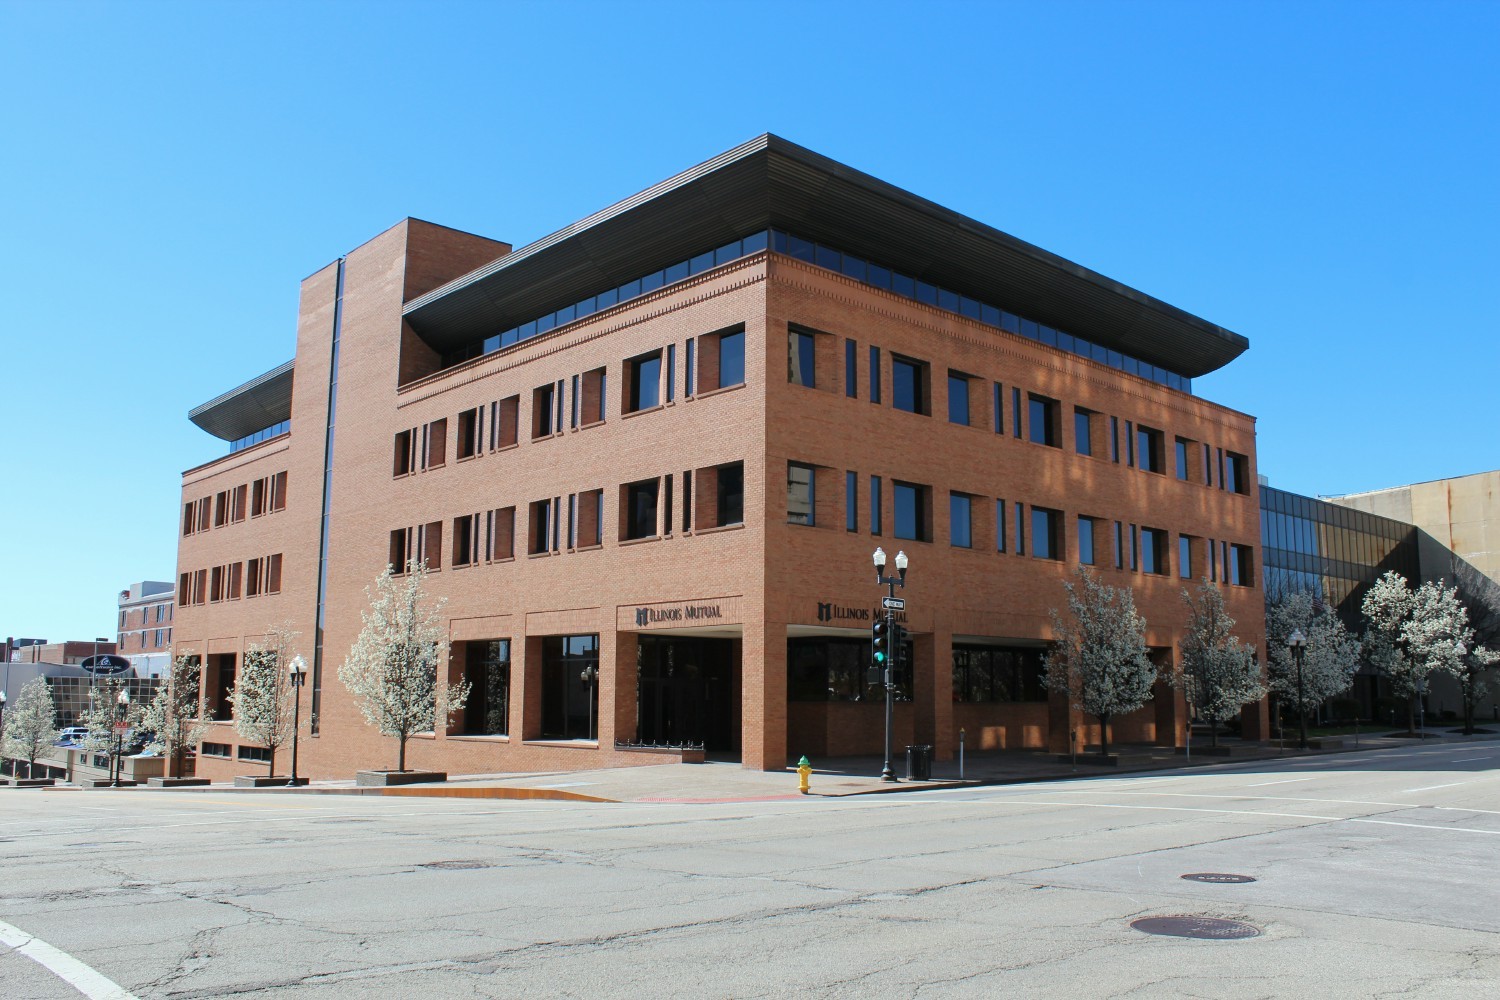 Illinois Mutual’s home office building has been a mainstay of the central Illinois community for over 40 years.